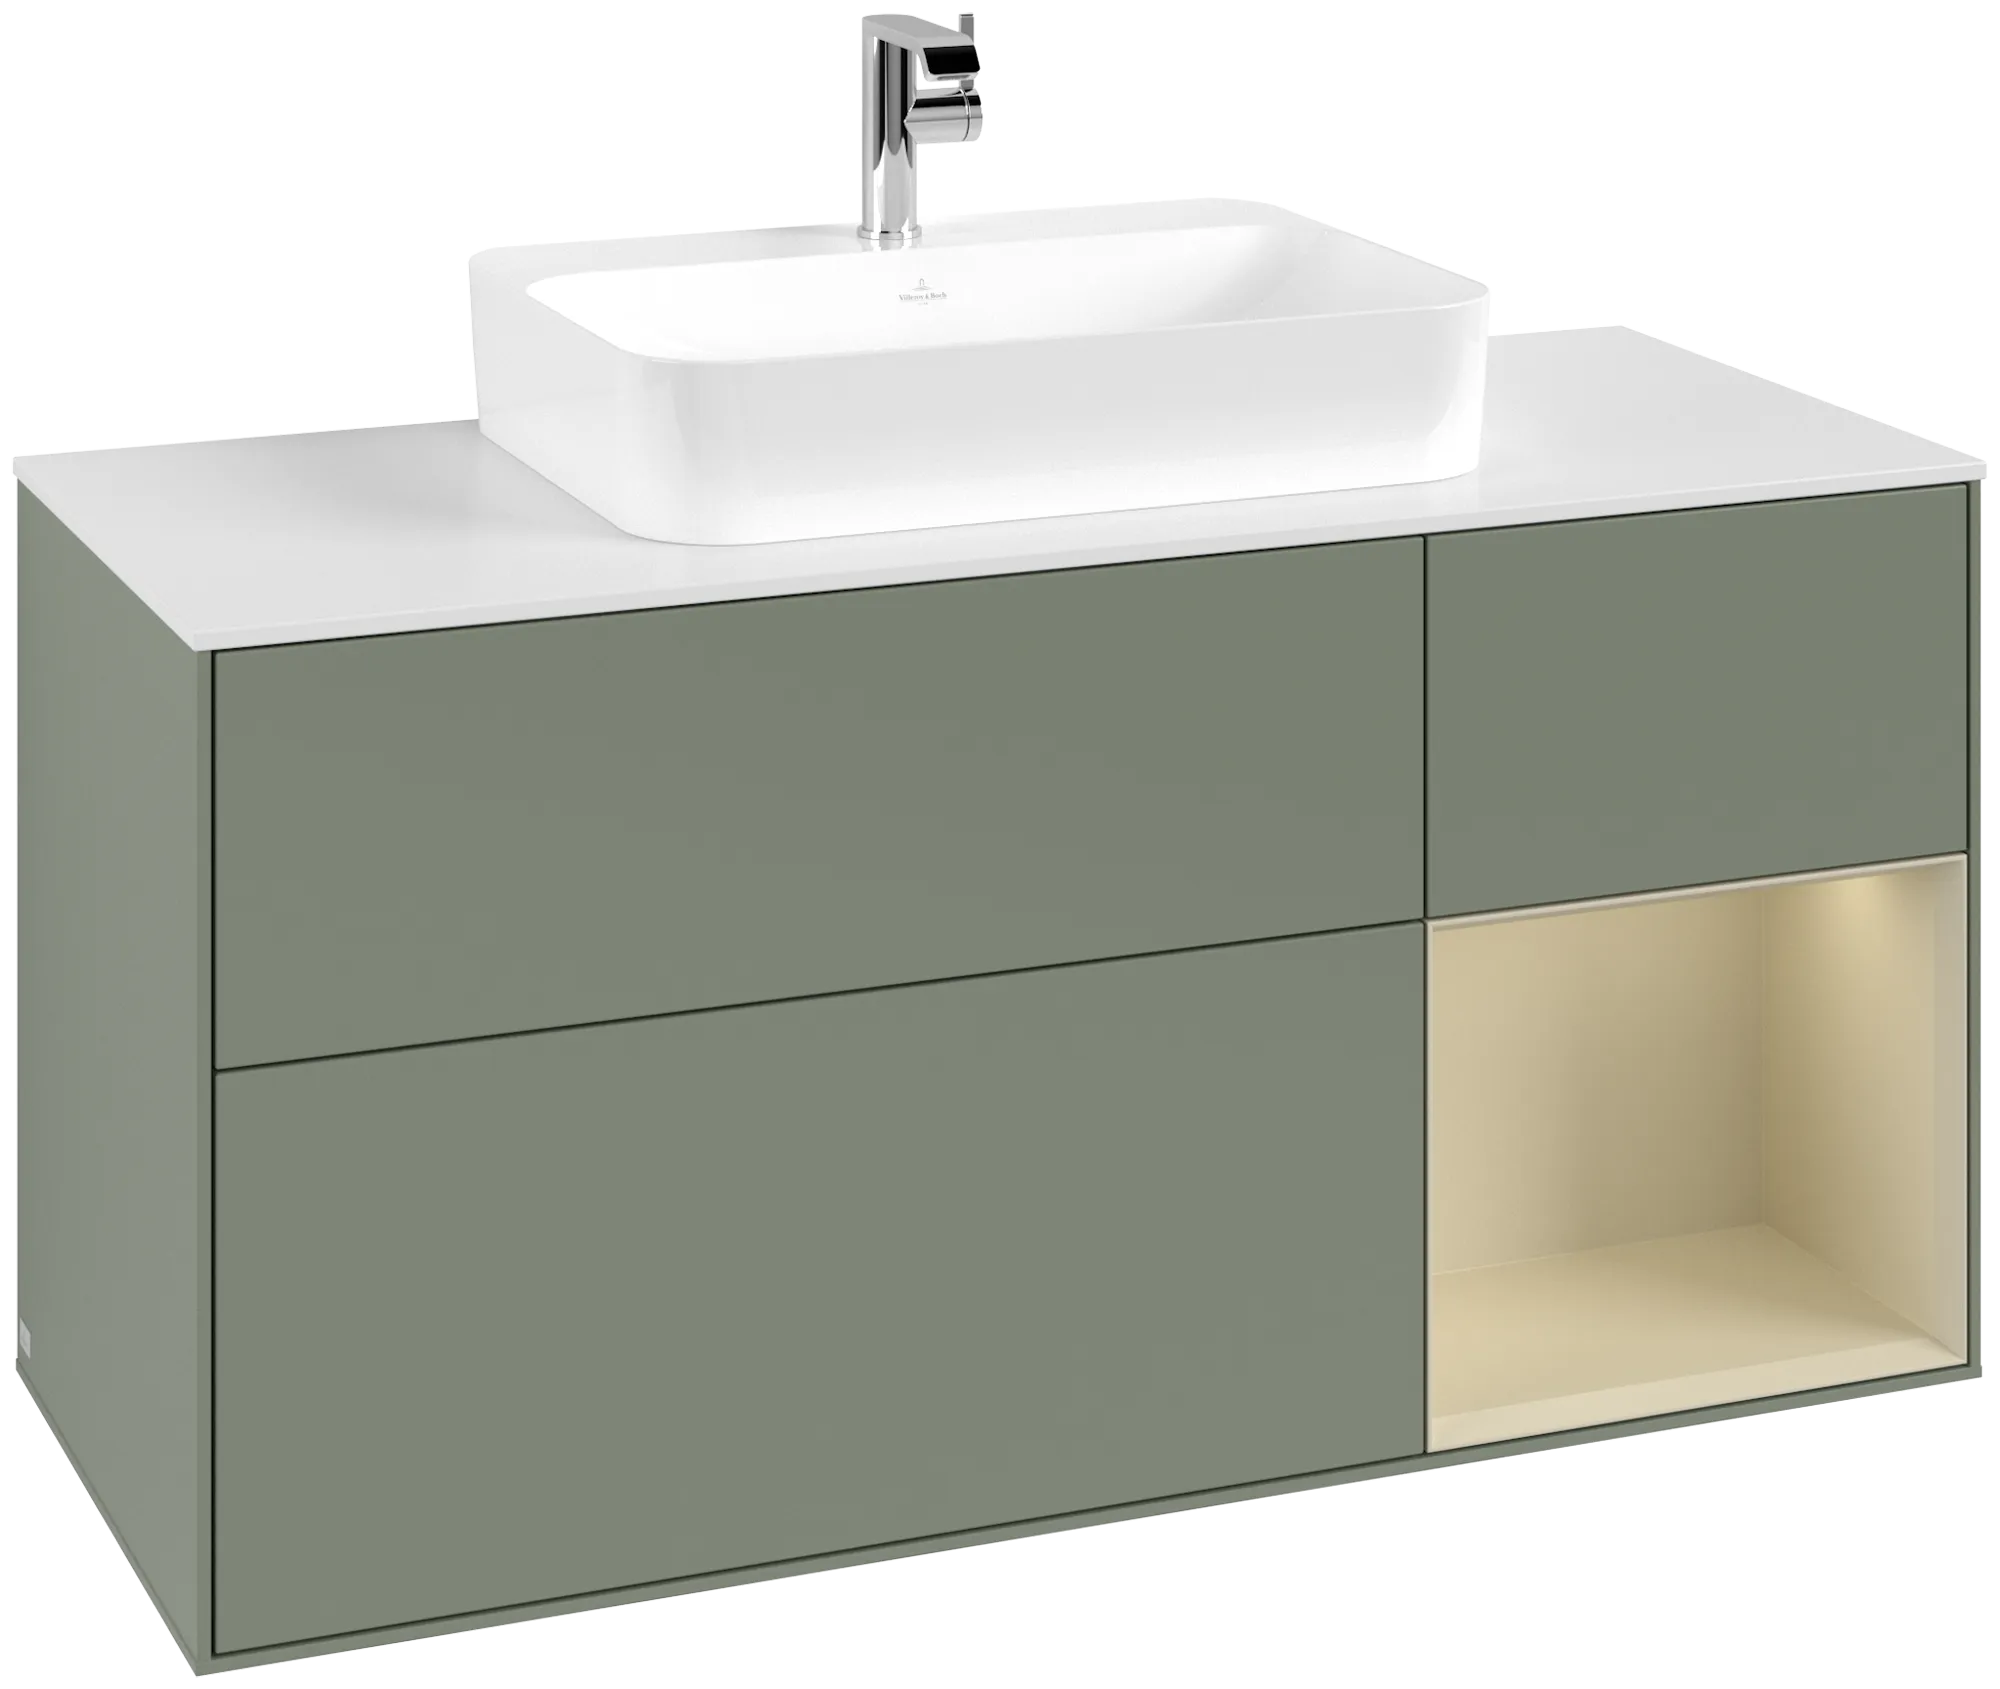 Picture of VILLEROY BOCH Finion Vanity unit, with lighting, 3 pull-out compartments, 1200 x 603 x 501 mm, Olive Matt Lacquer / Silk Grey Matt Lacquer / Glass White Matt #G421HJGM